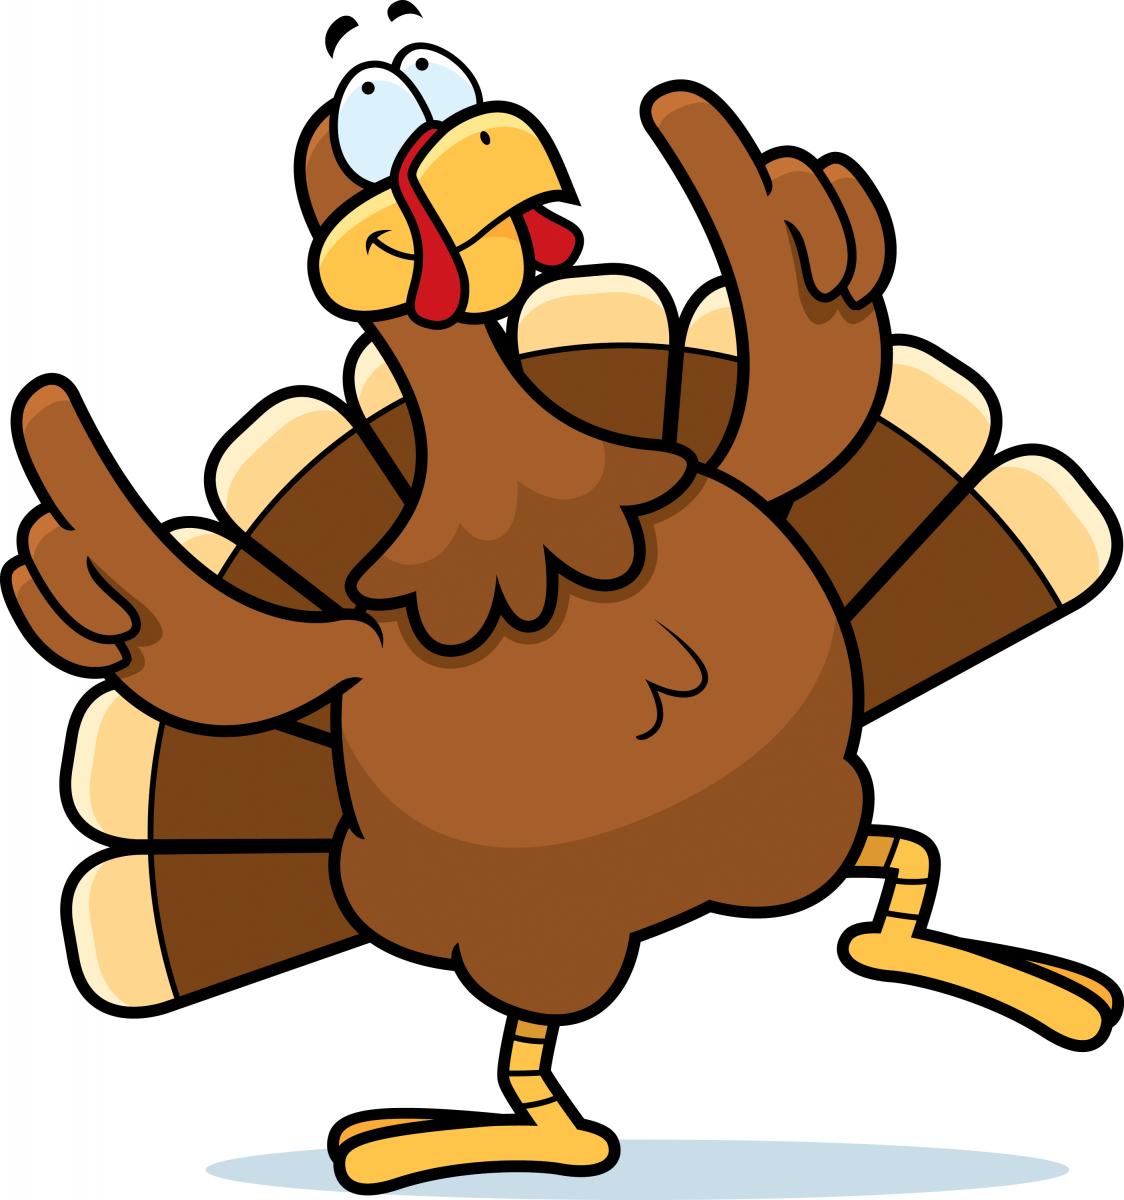 Turkey Holding a Blank Sign